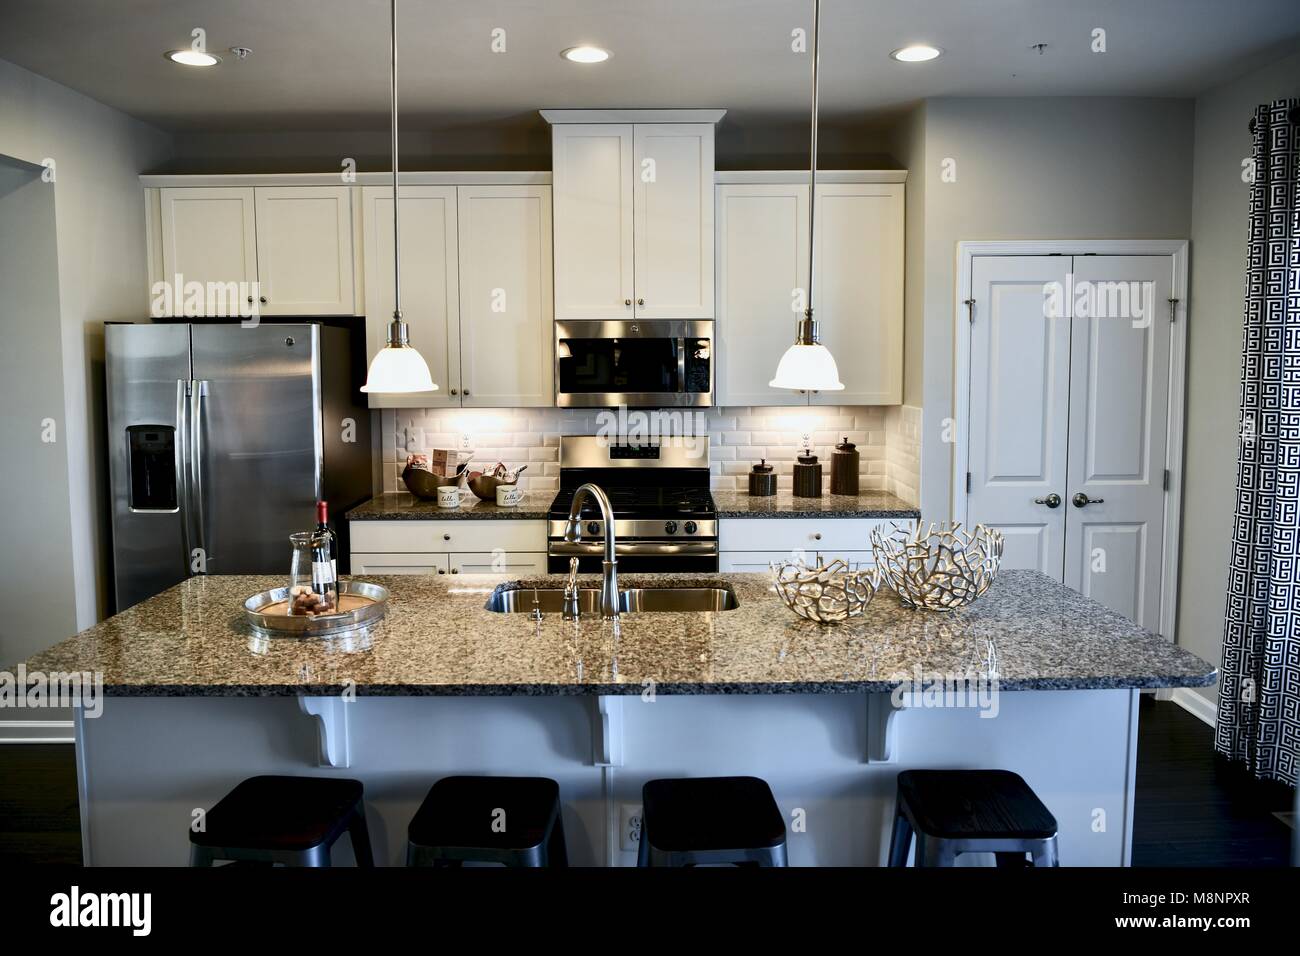 Modern kitchen view inside contemporary home Stock Photo